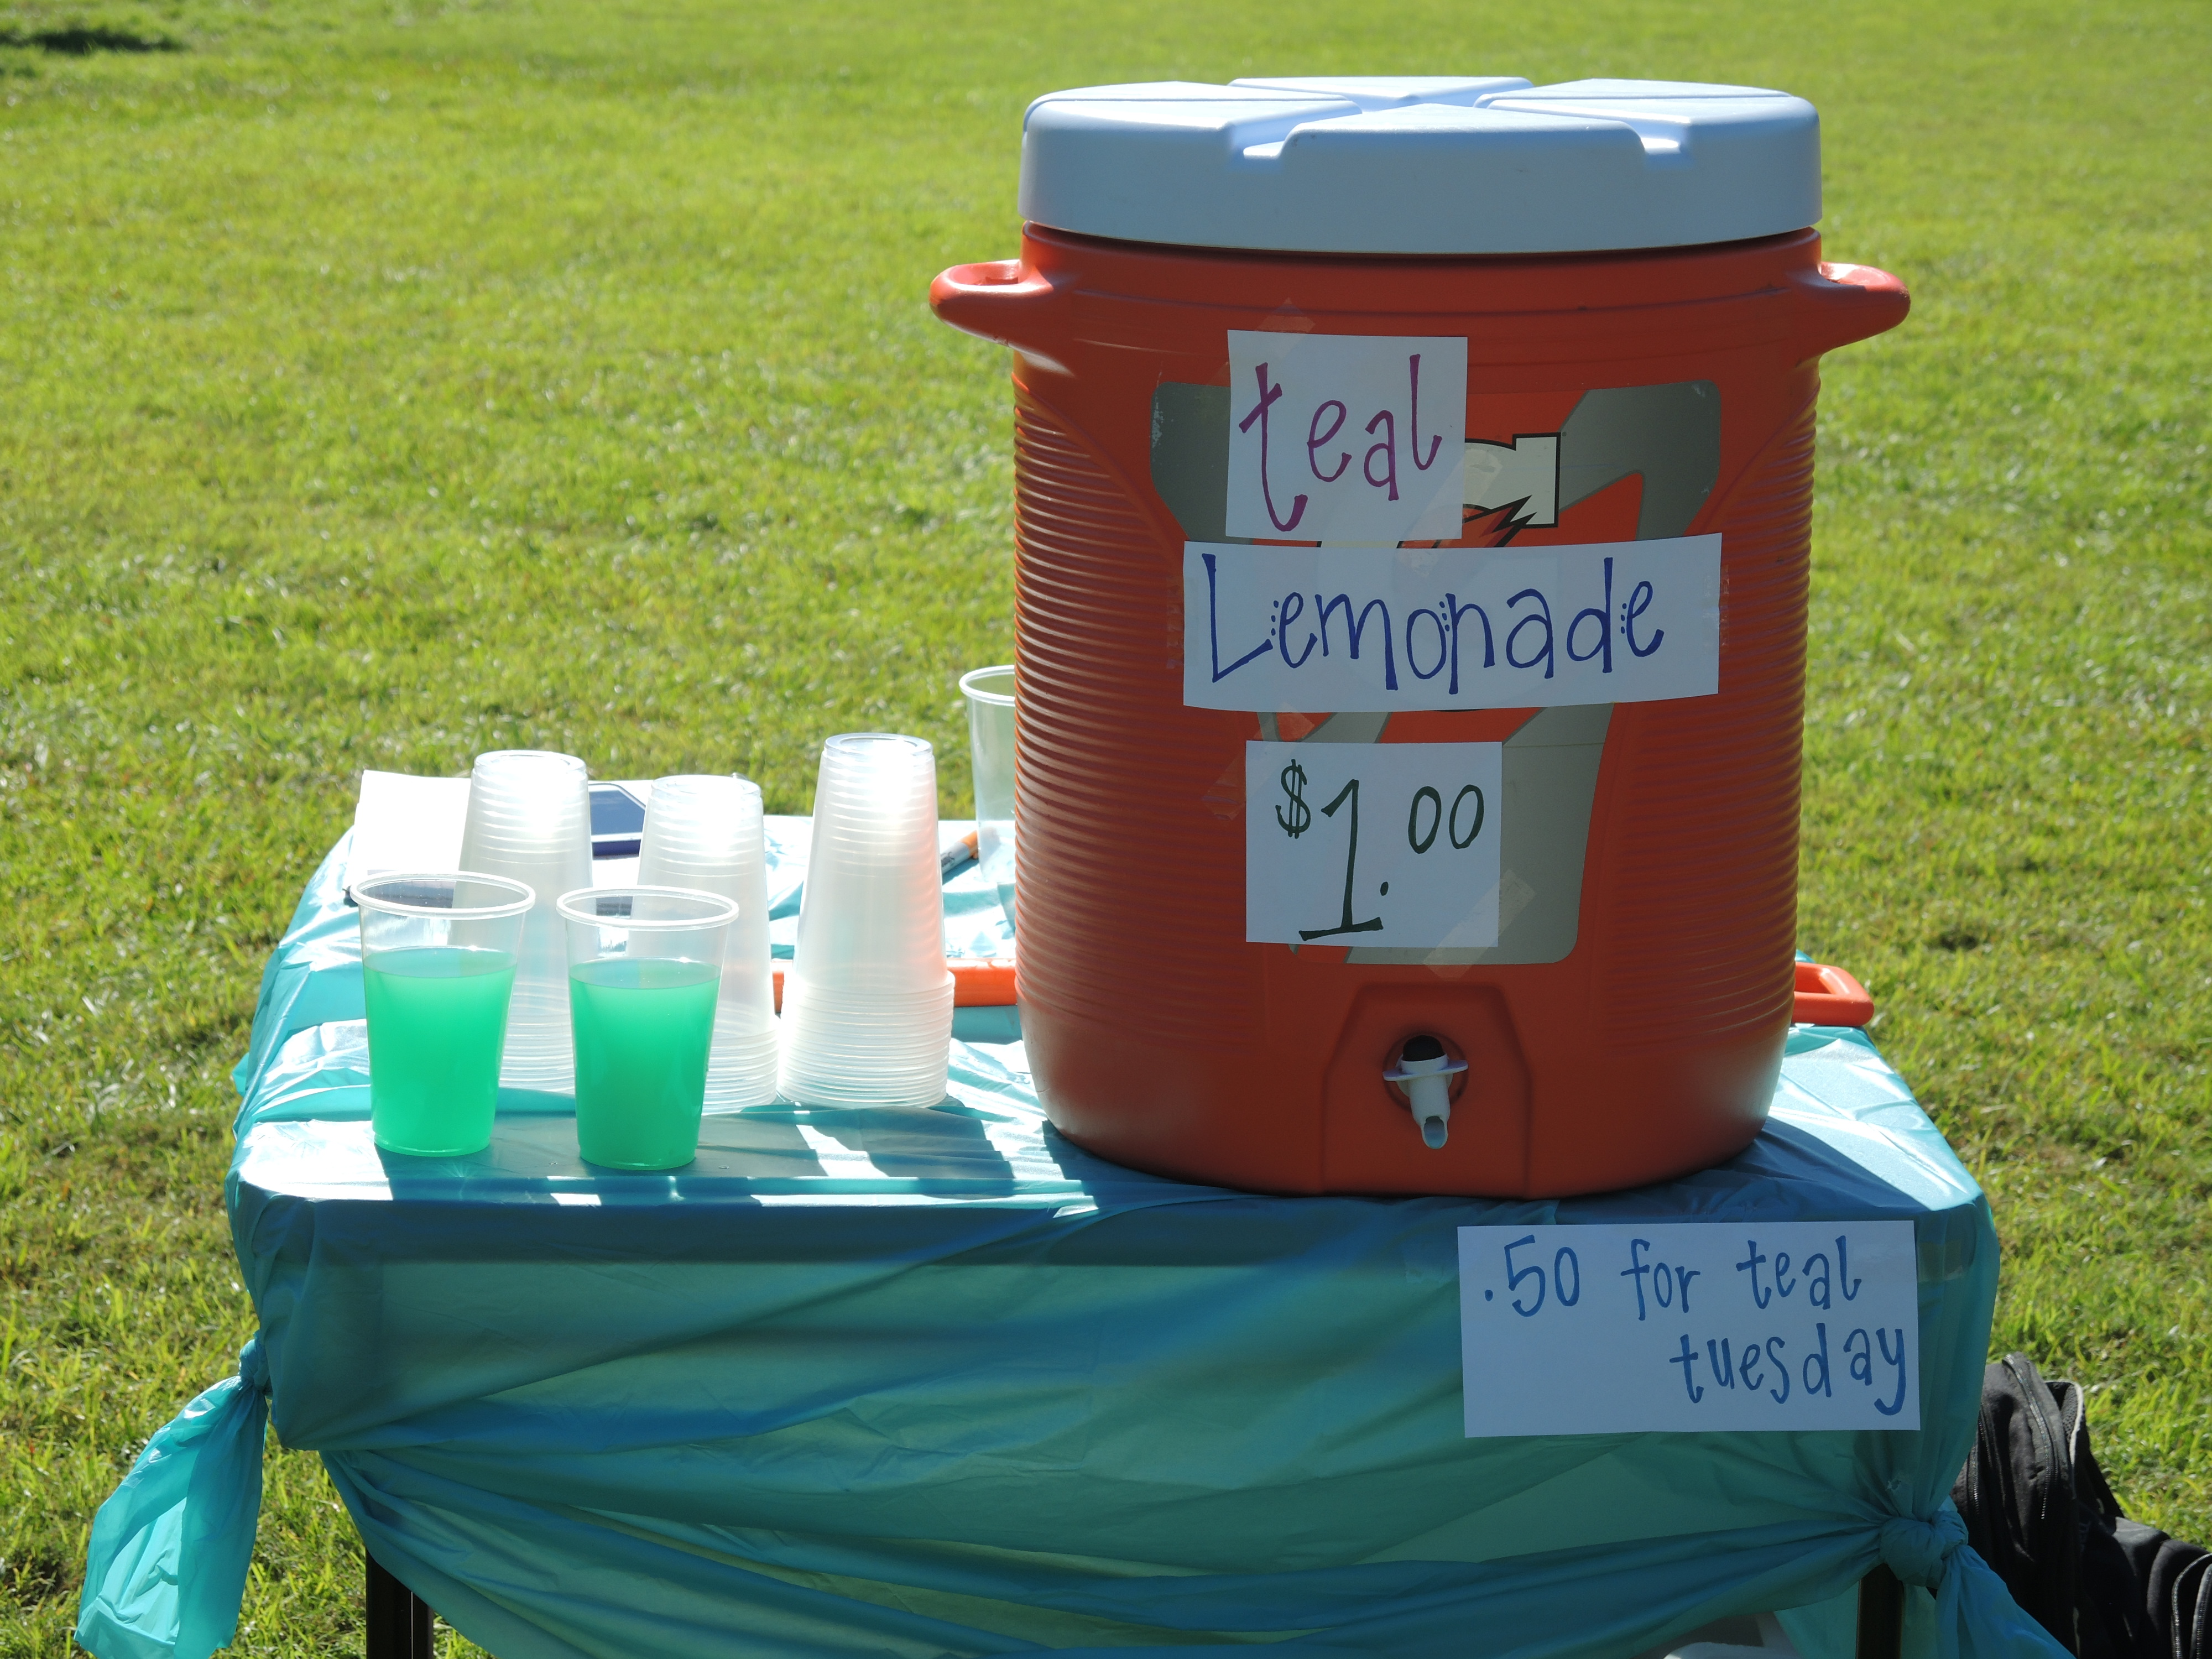 Competition over. In my mind, the teal lemonade was the best idea out on Prince Lawn.